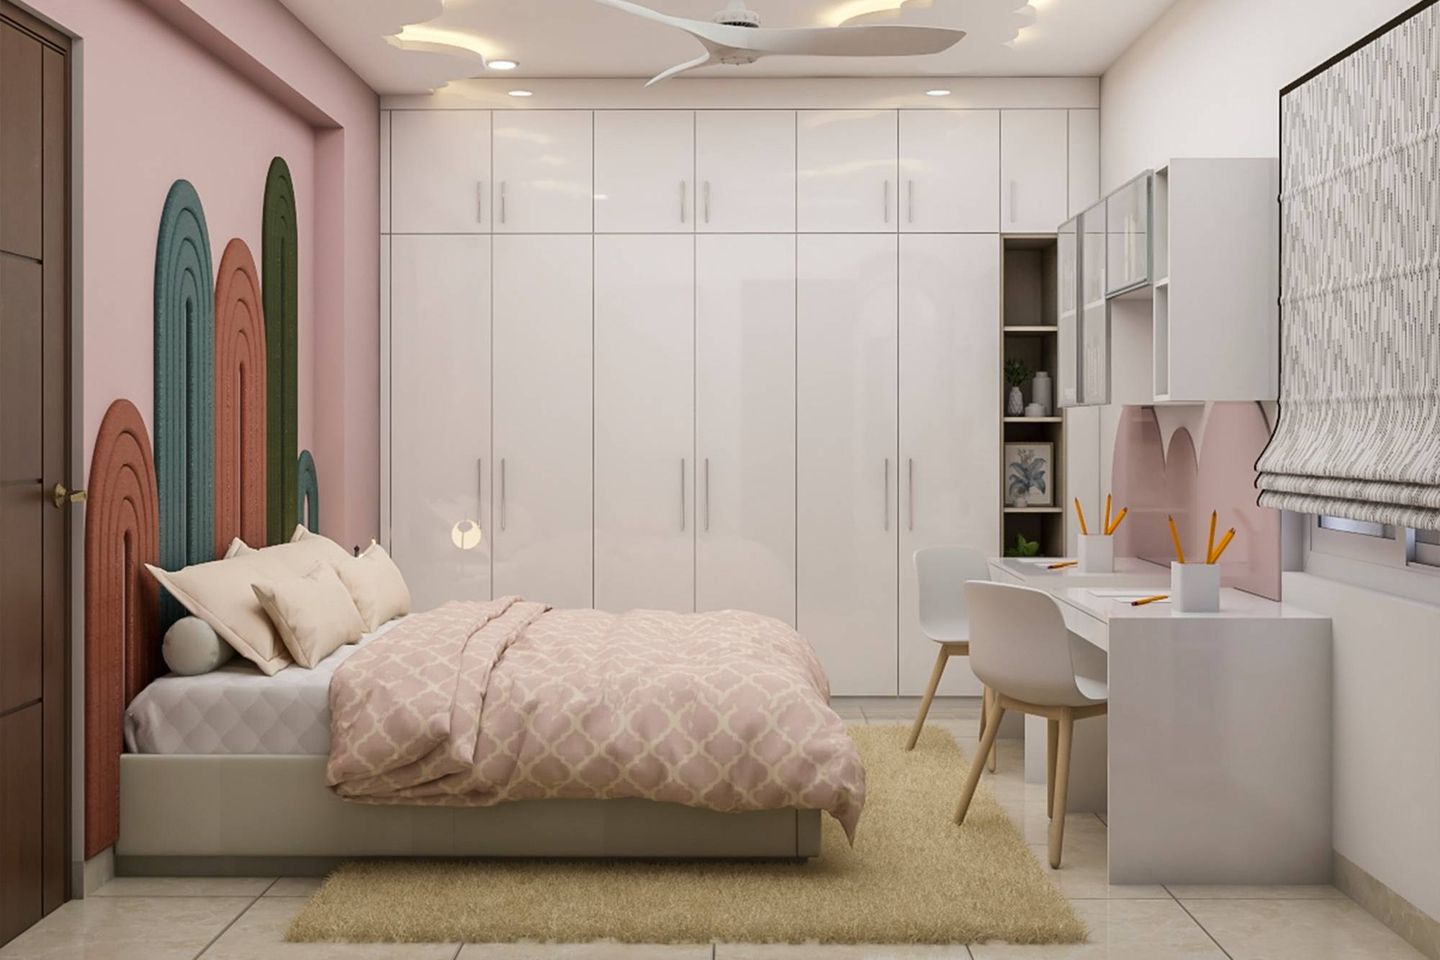 Art Deco Pink And White Kids Room Design For Girls With Cloud POP Ceiling